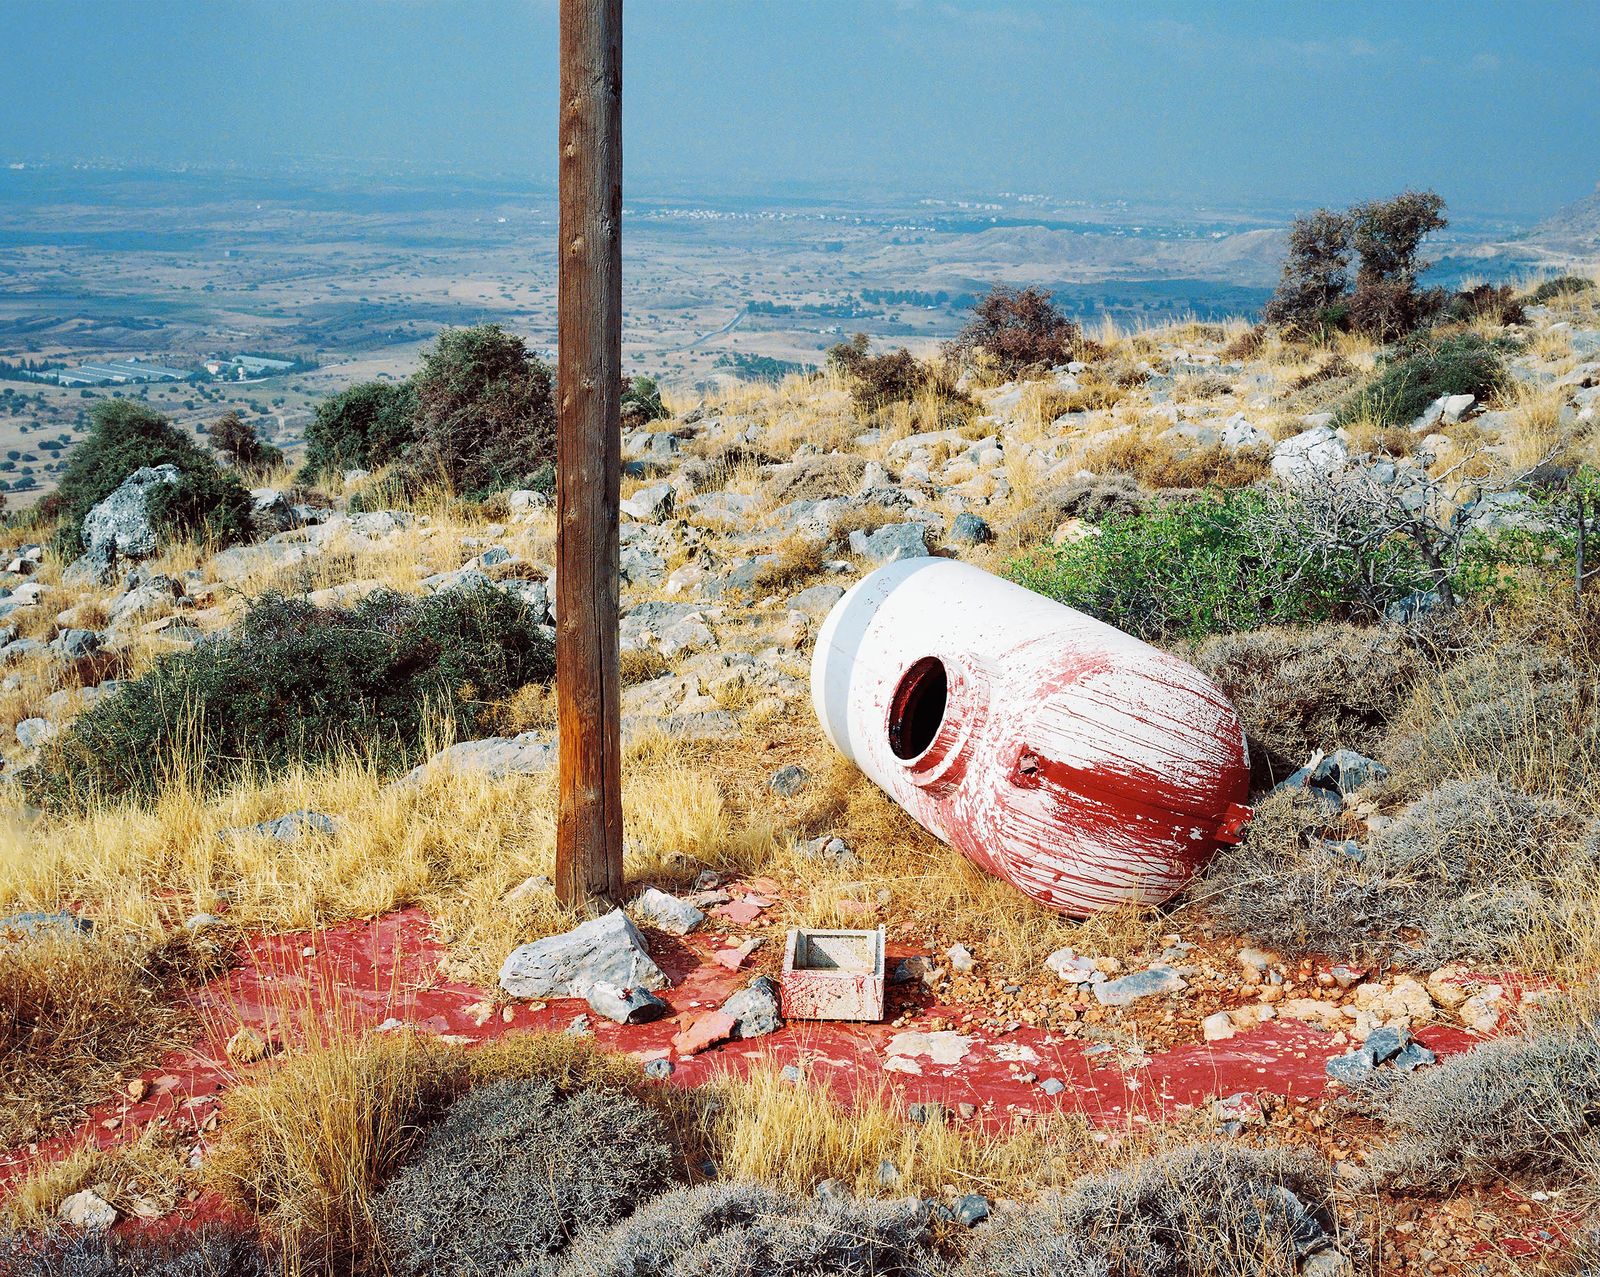 © Chauvin Guillaume - Image from the Northern Cyprus : the impossible island photography project